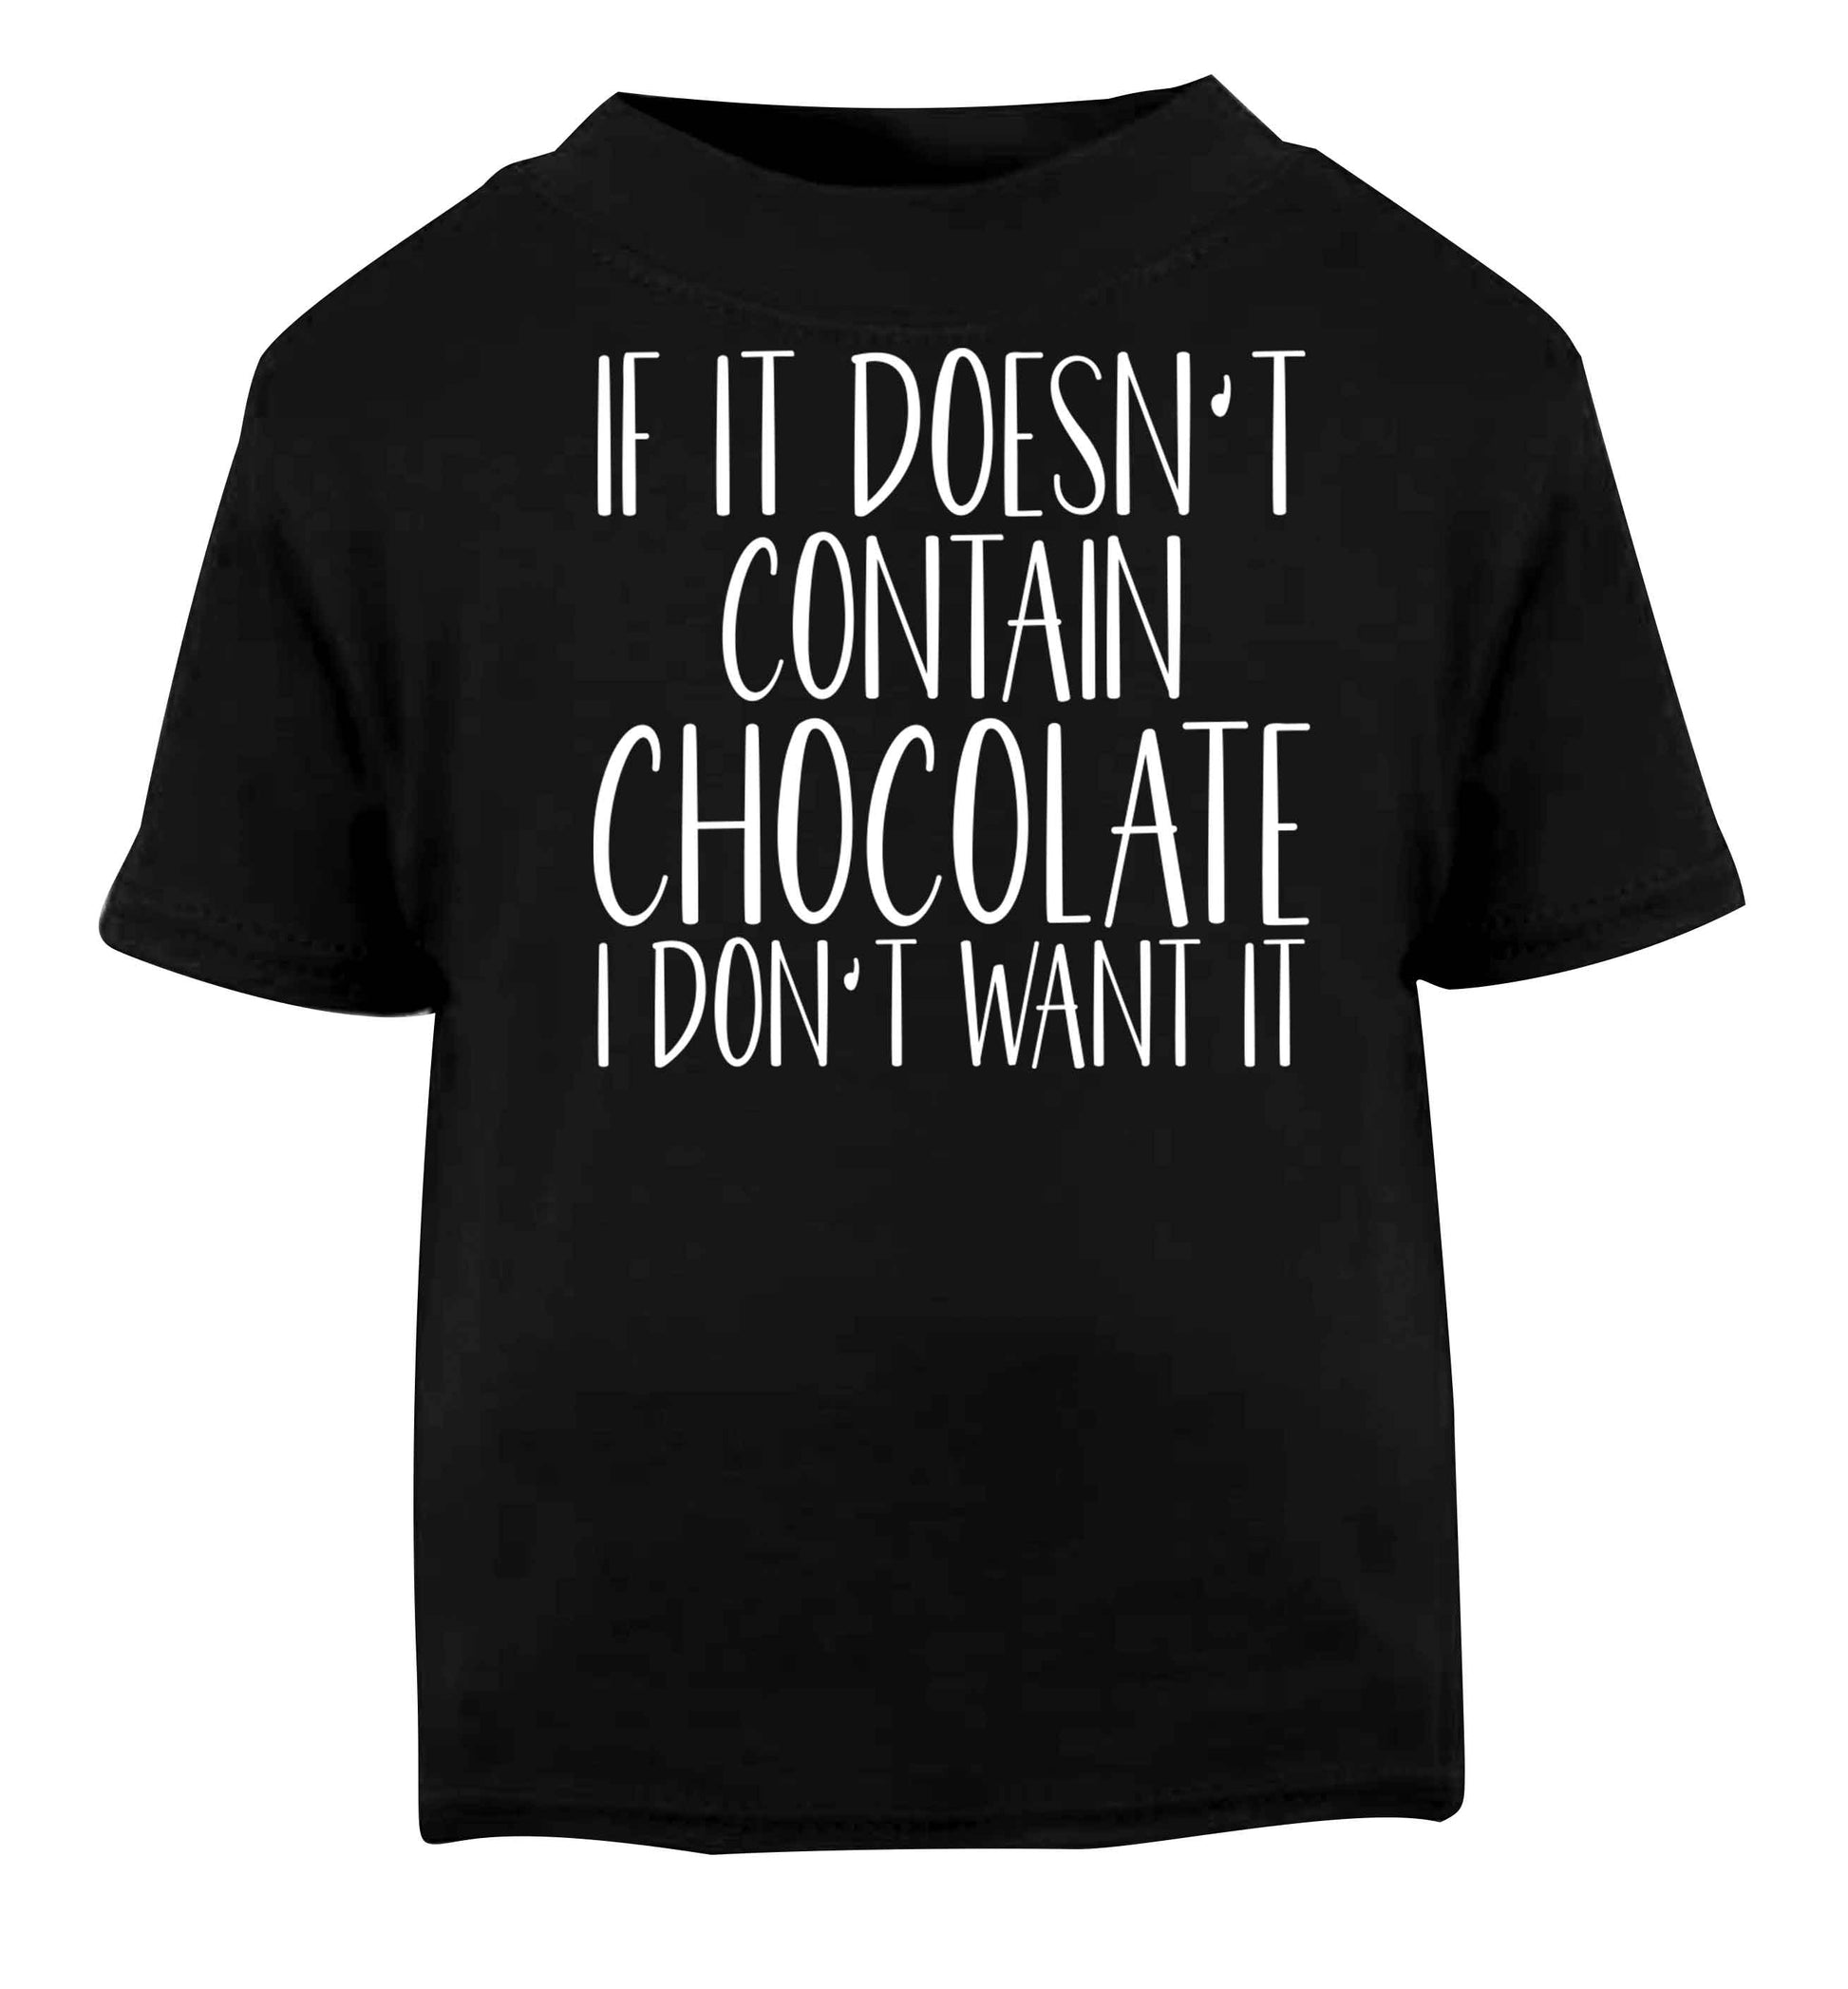 If it doesn't contain chocolate I don't want it Black baby toddler Tshirt 2 years